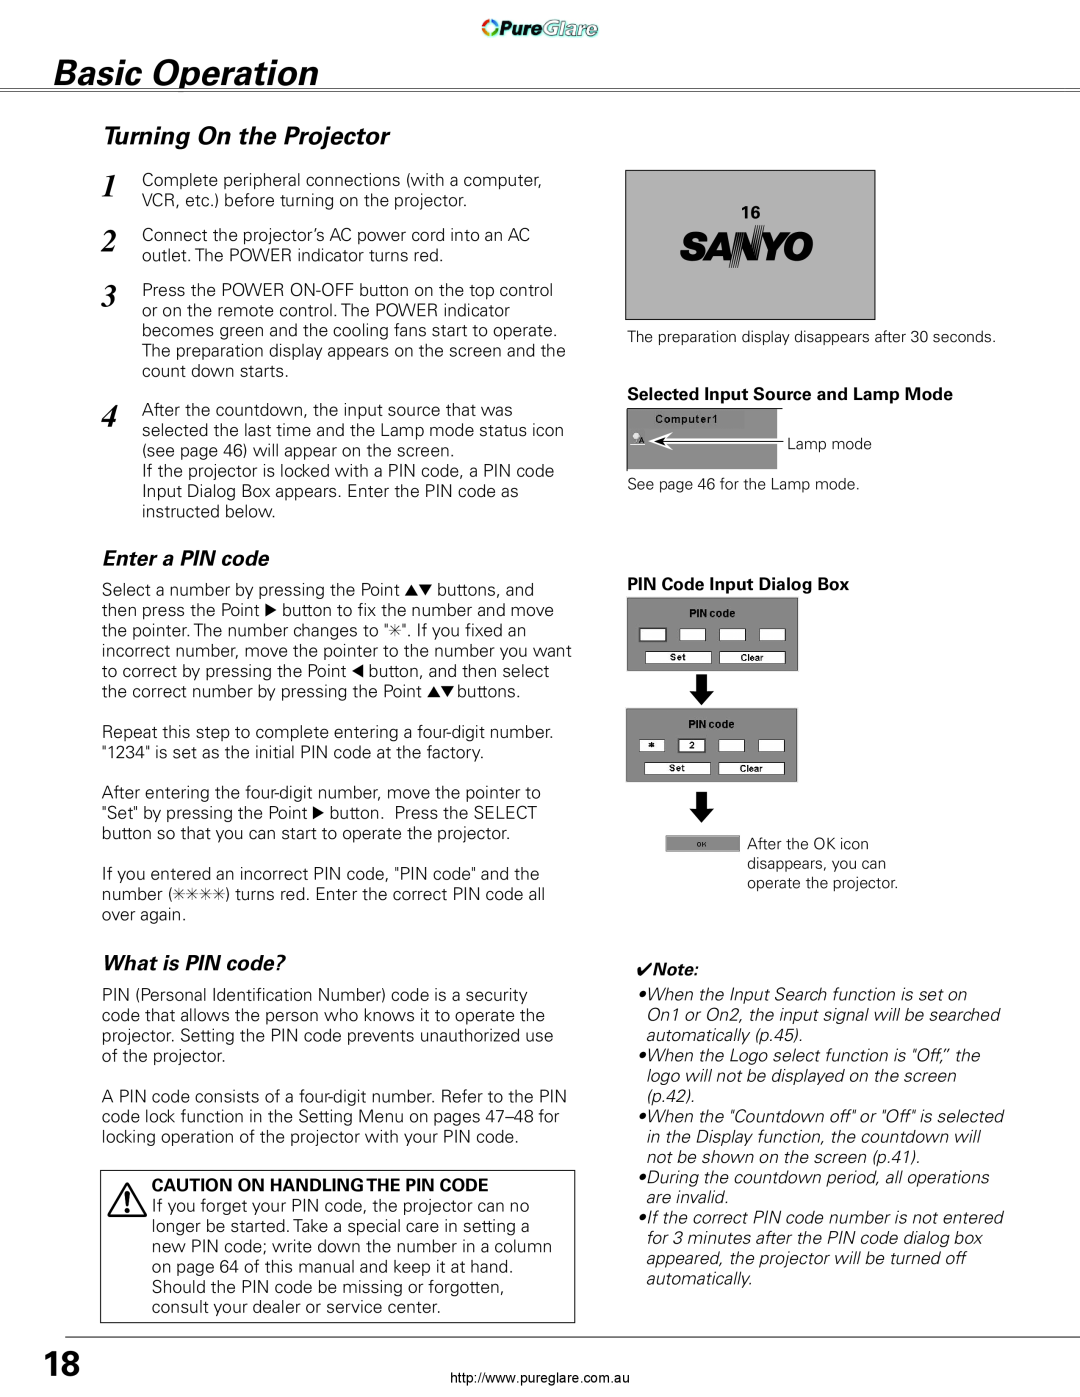 Sanyo PLC-XL45 Basic Operation, Turning On the Projector, Enter a PIN code, What is PIN code?, PIN Code Input Dialog Box 